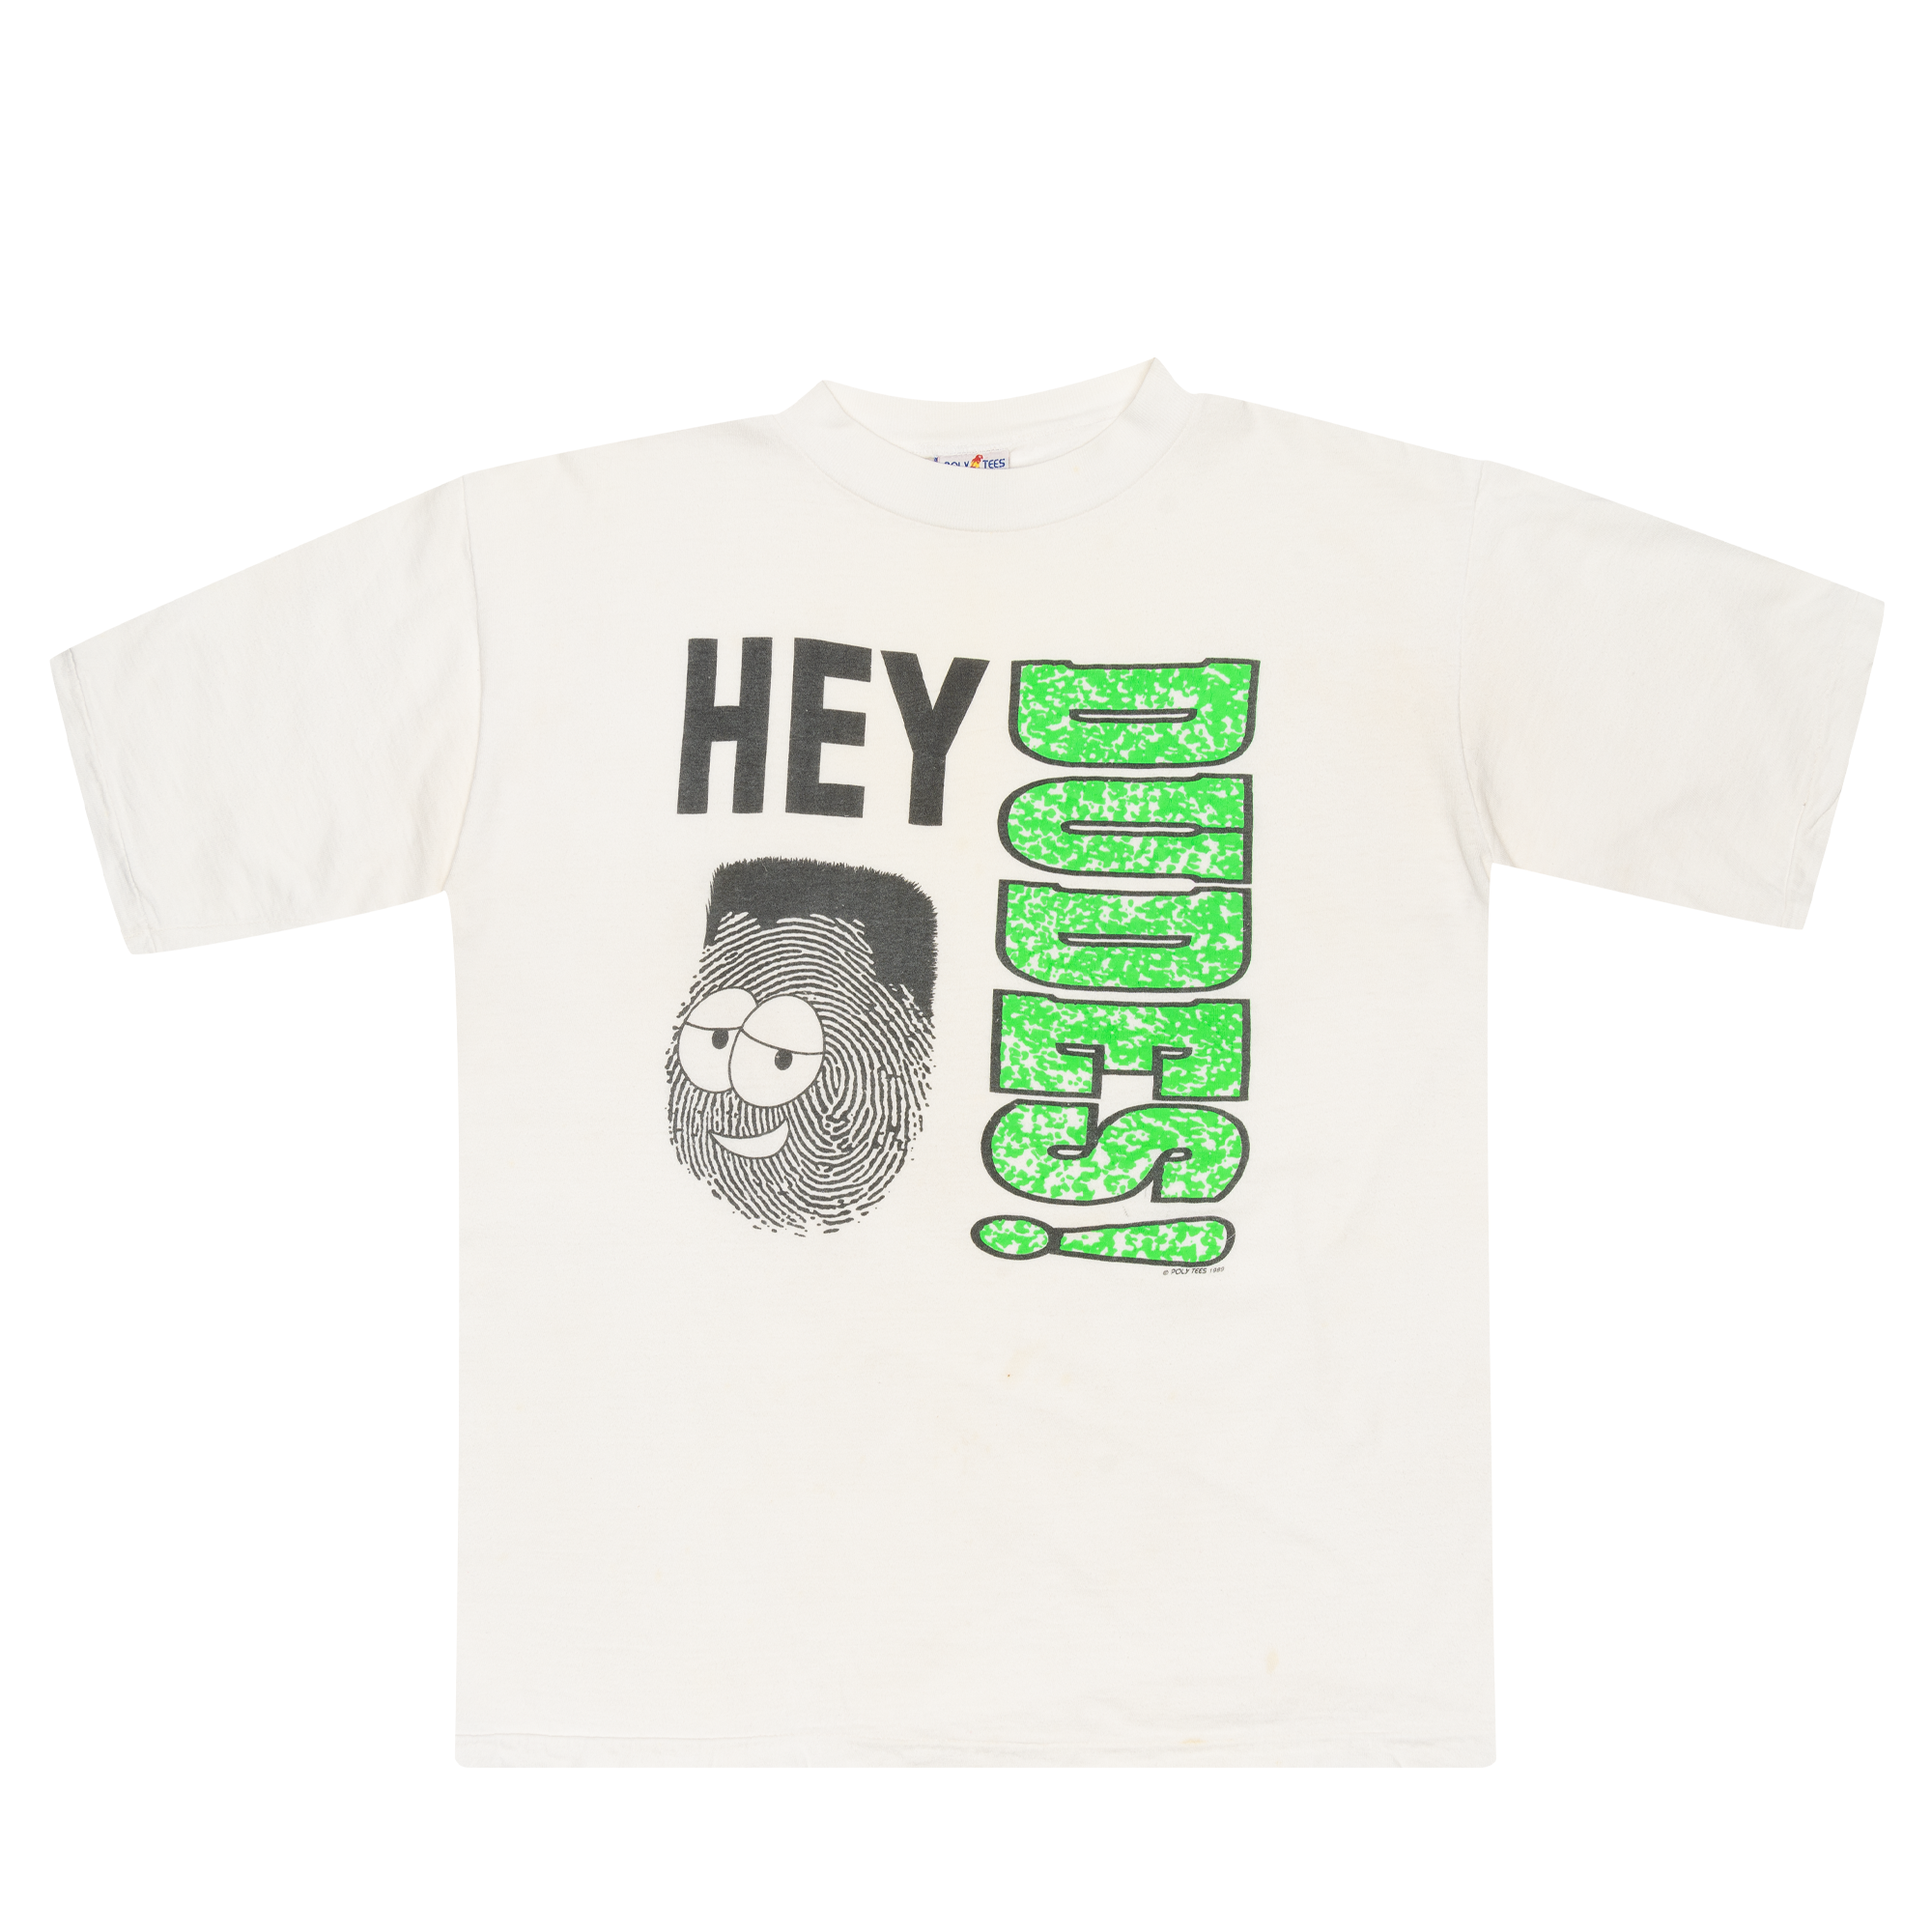 Hey Dudes! By Poly Tees 1989 Tee White-PLUS